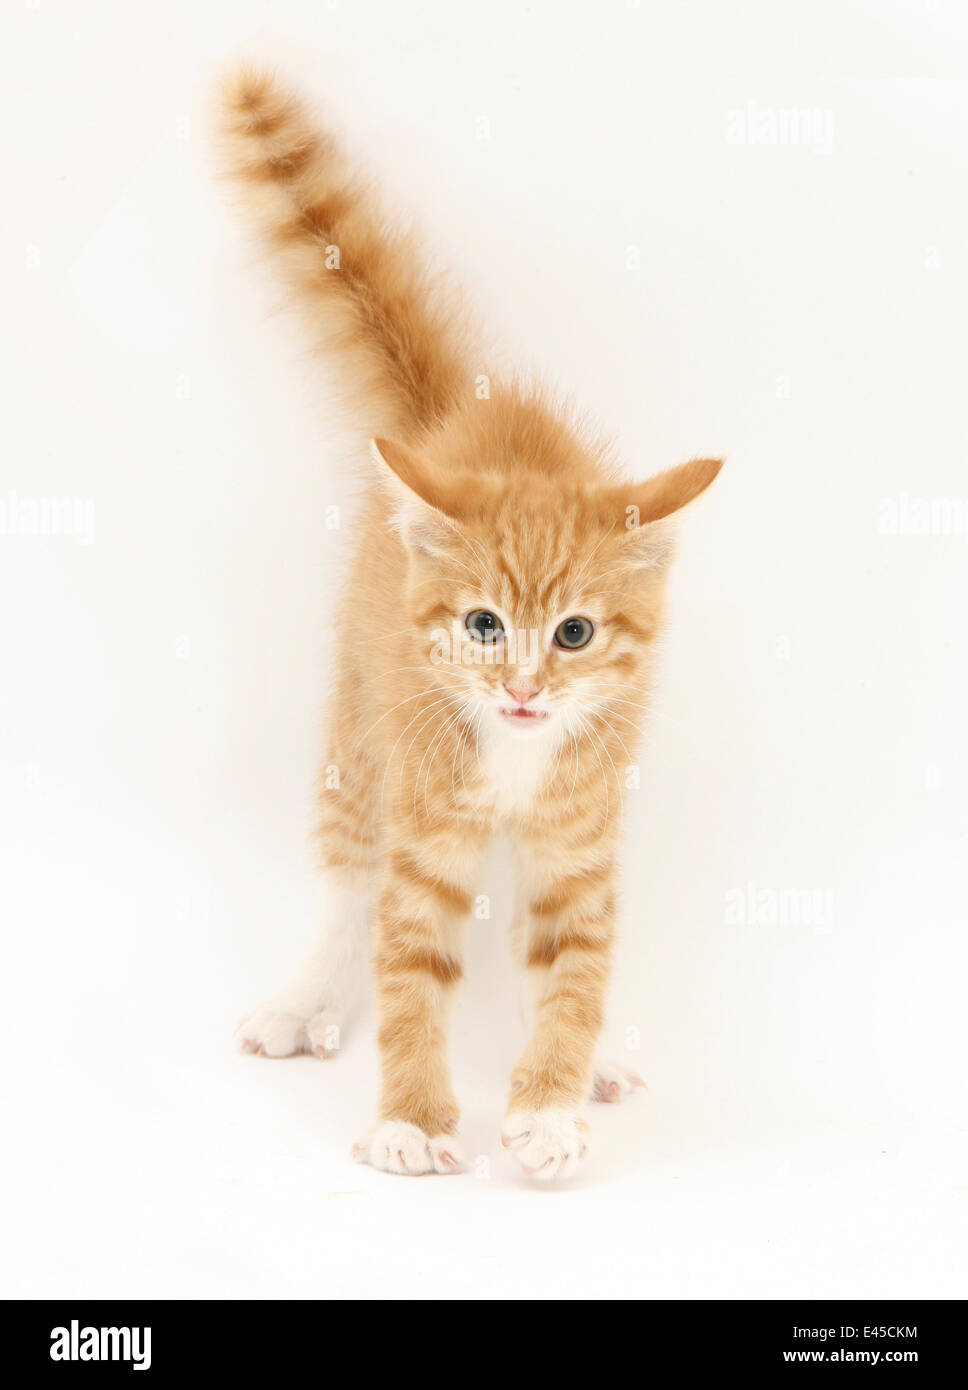 Ginger kitten with tail in the air Stock Photo